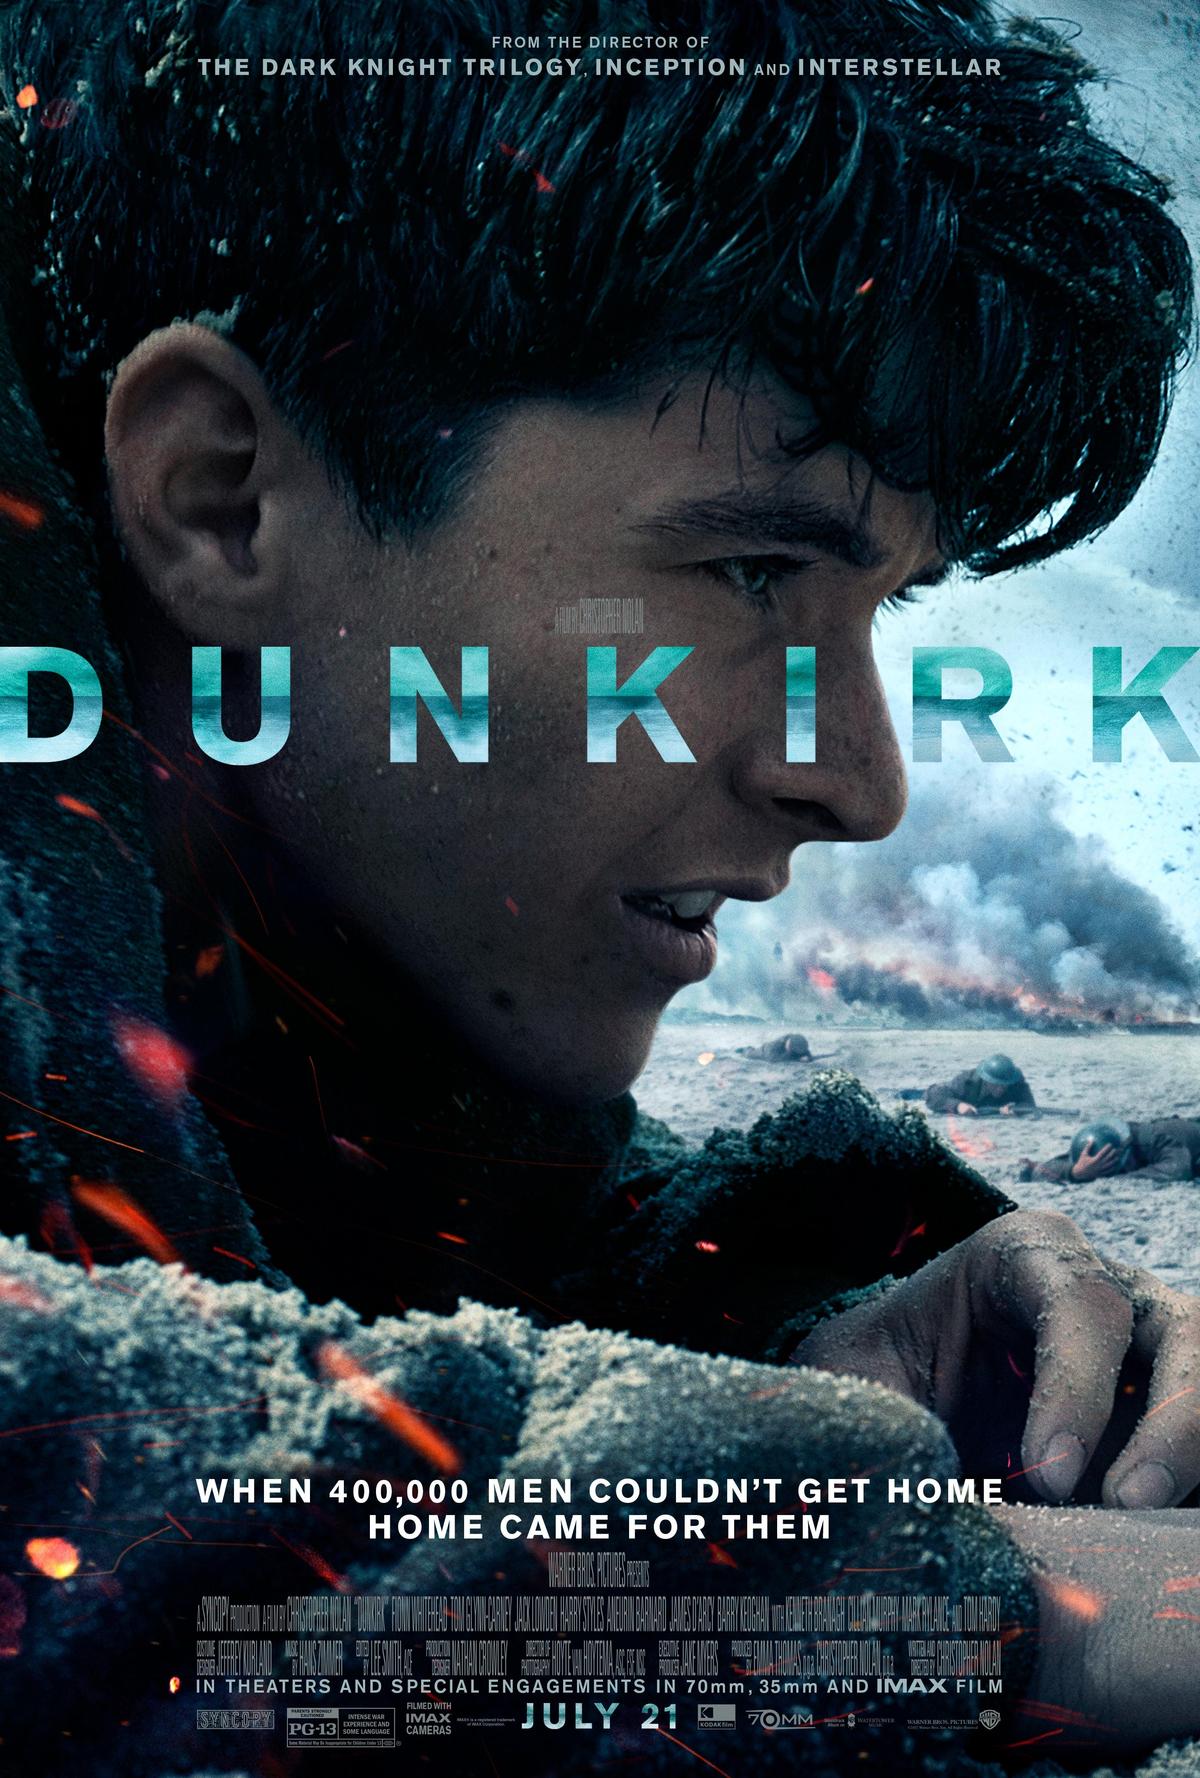  Movie poster for "Dunkirk."